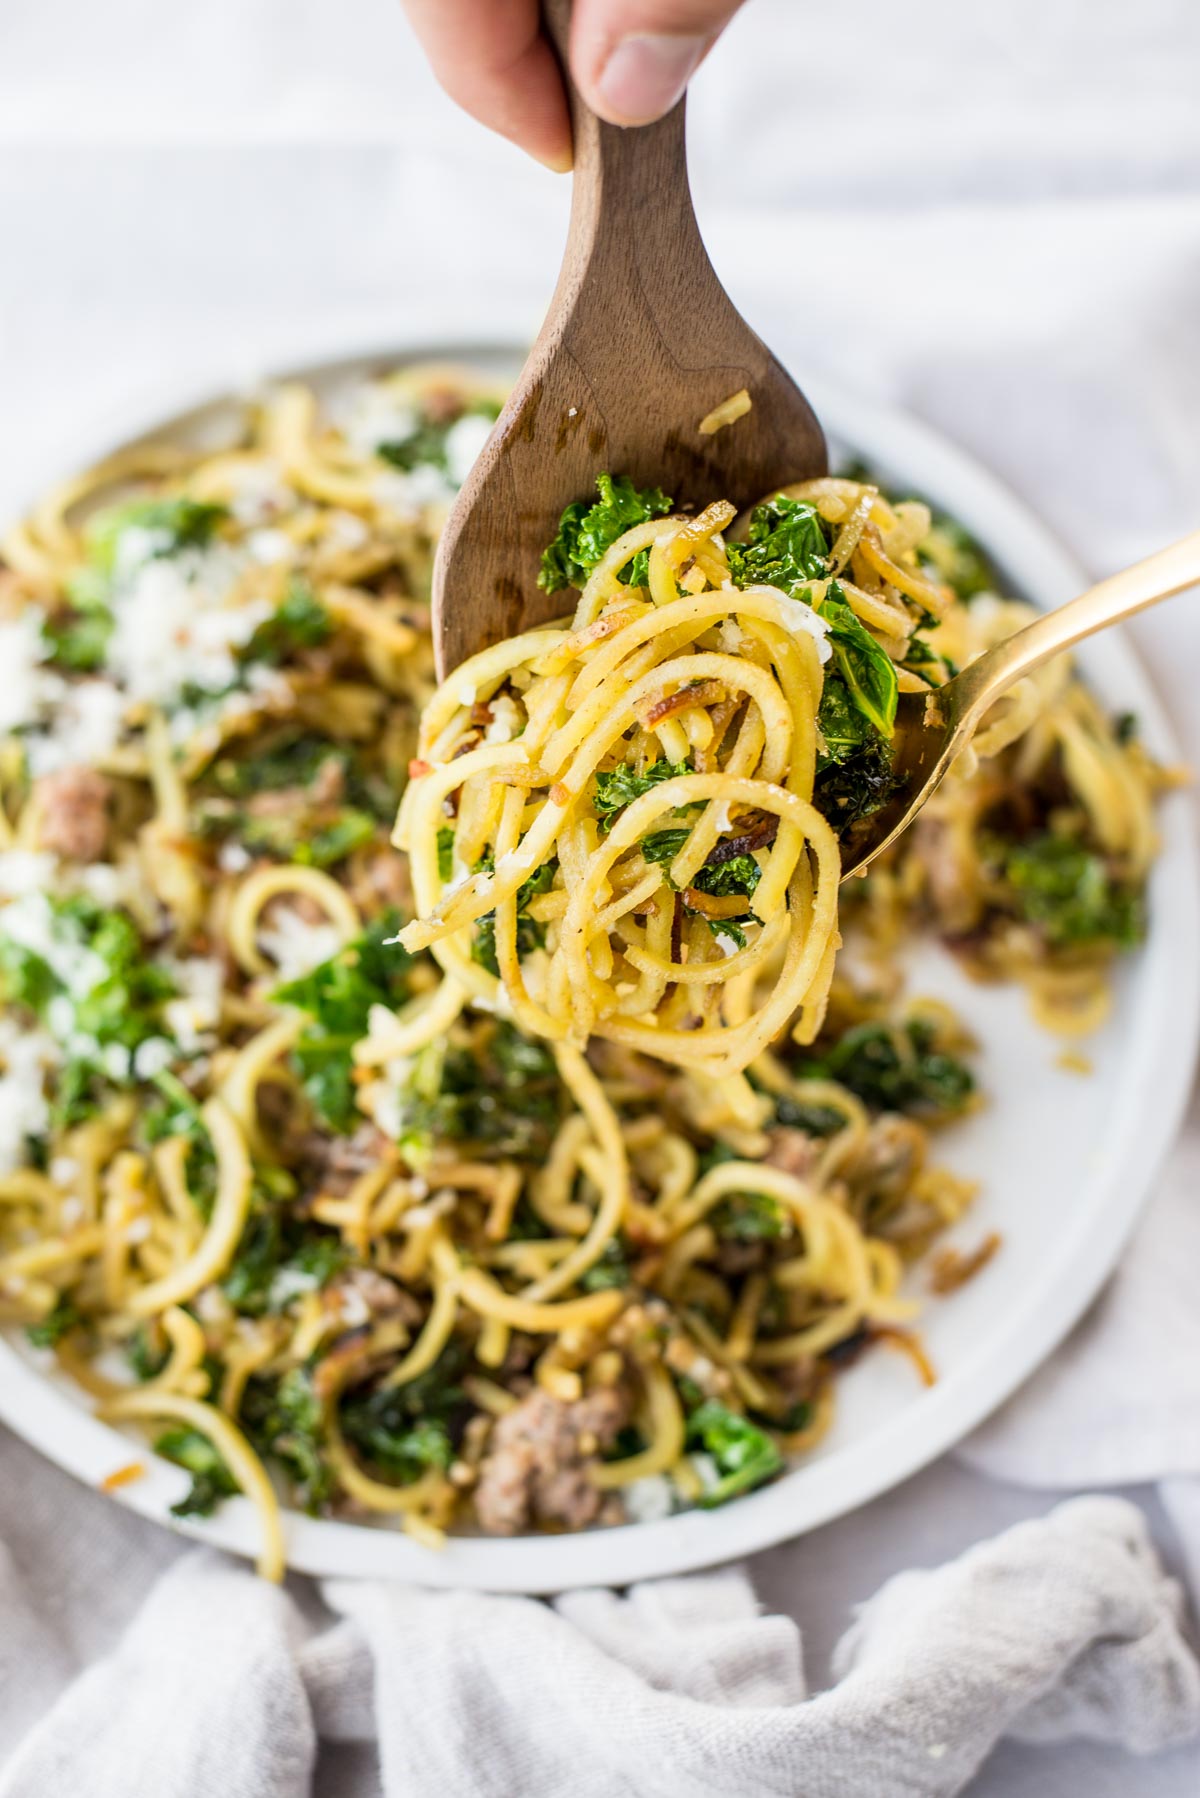 The easy spaghetti recipe you've been missing! This six ingredient spaghetti with garlic and kale is made in less than 20 minutes! #healthy #paleo #30minute